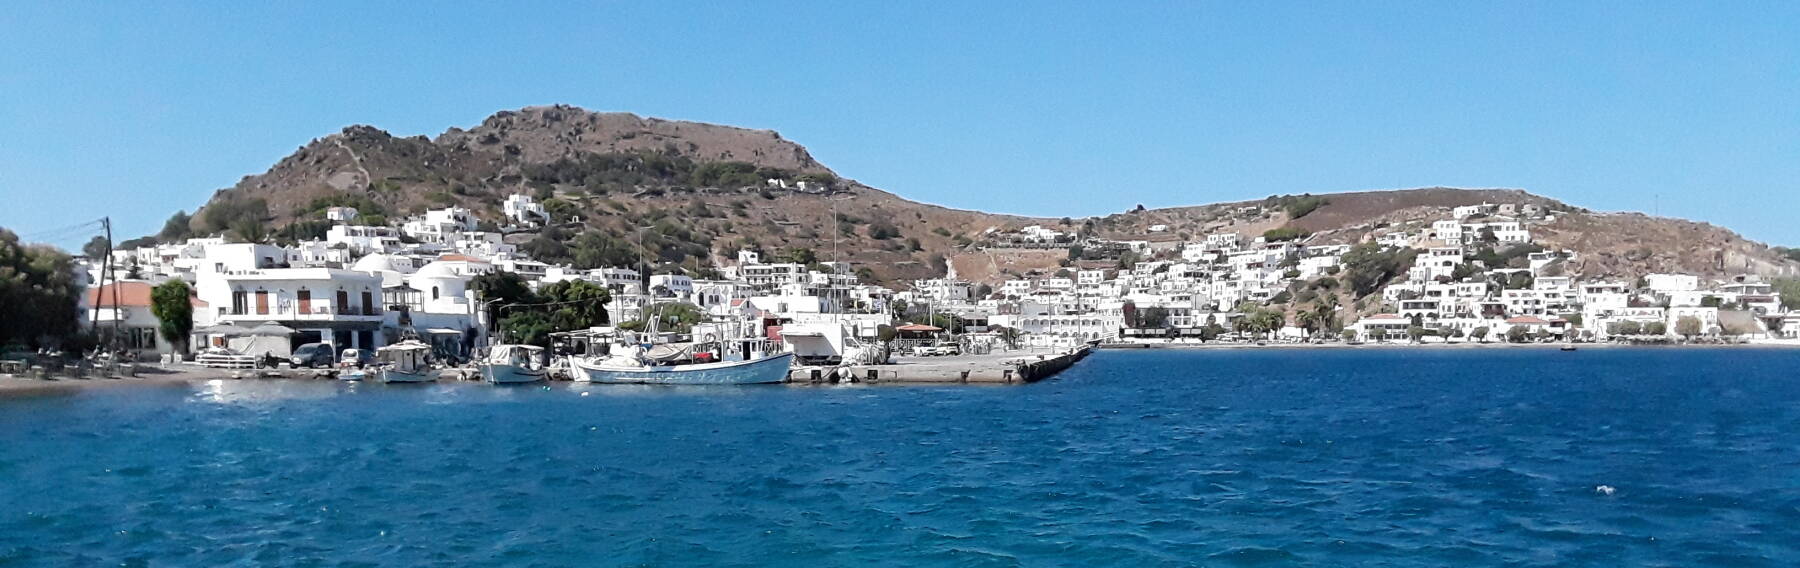 Patmos harbor and the port town of Skala.